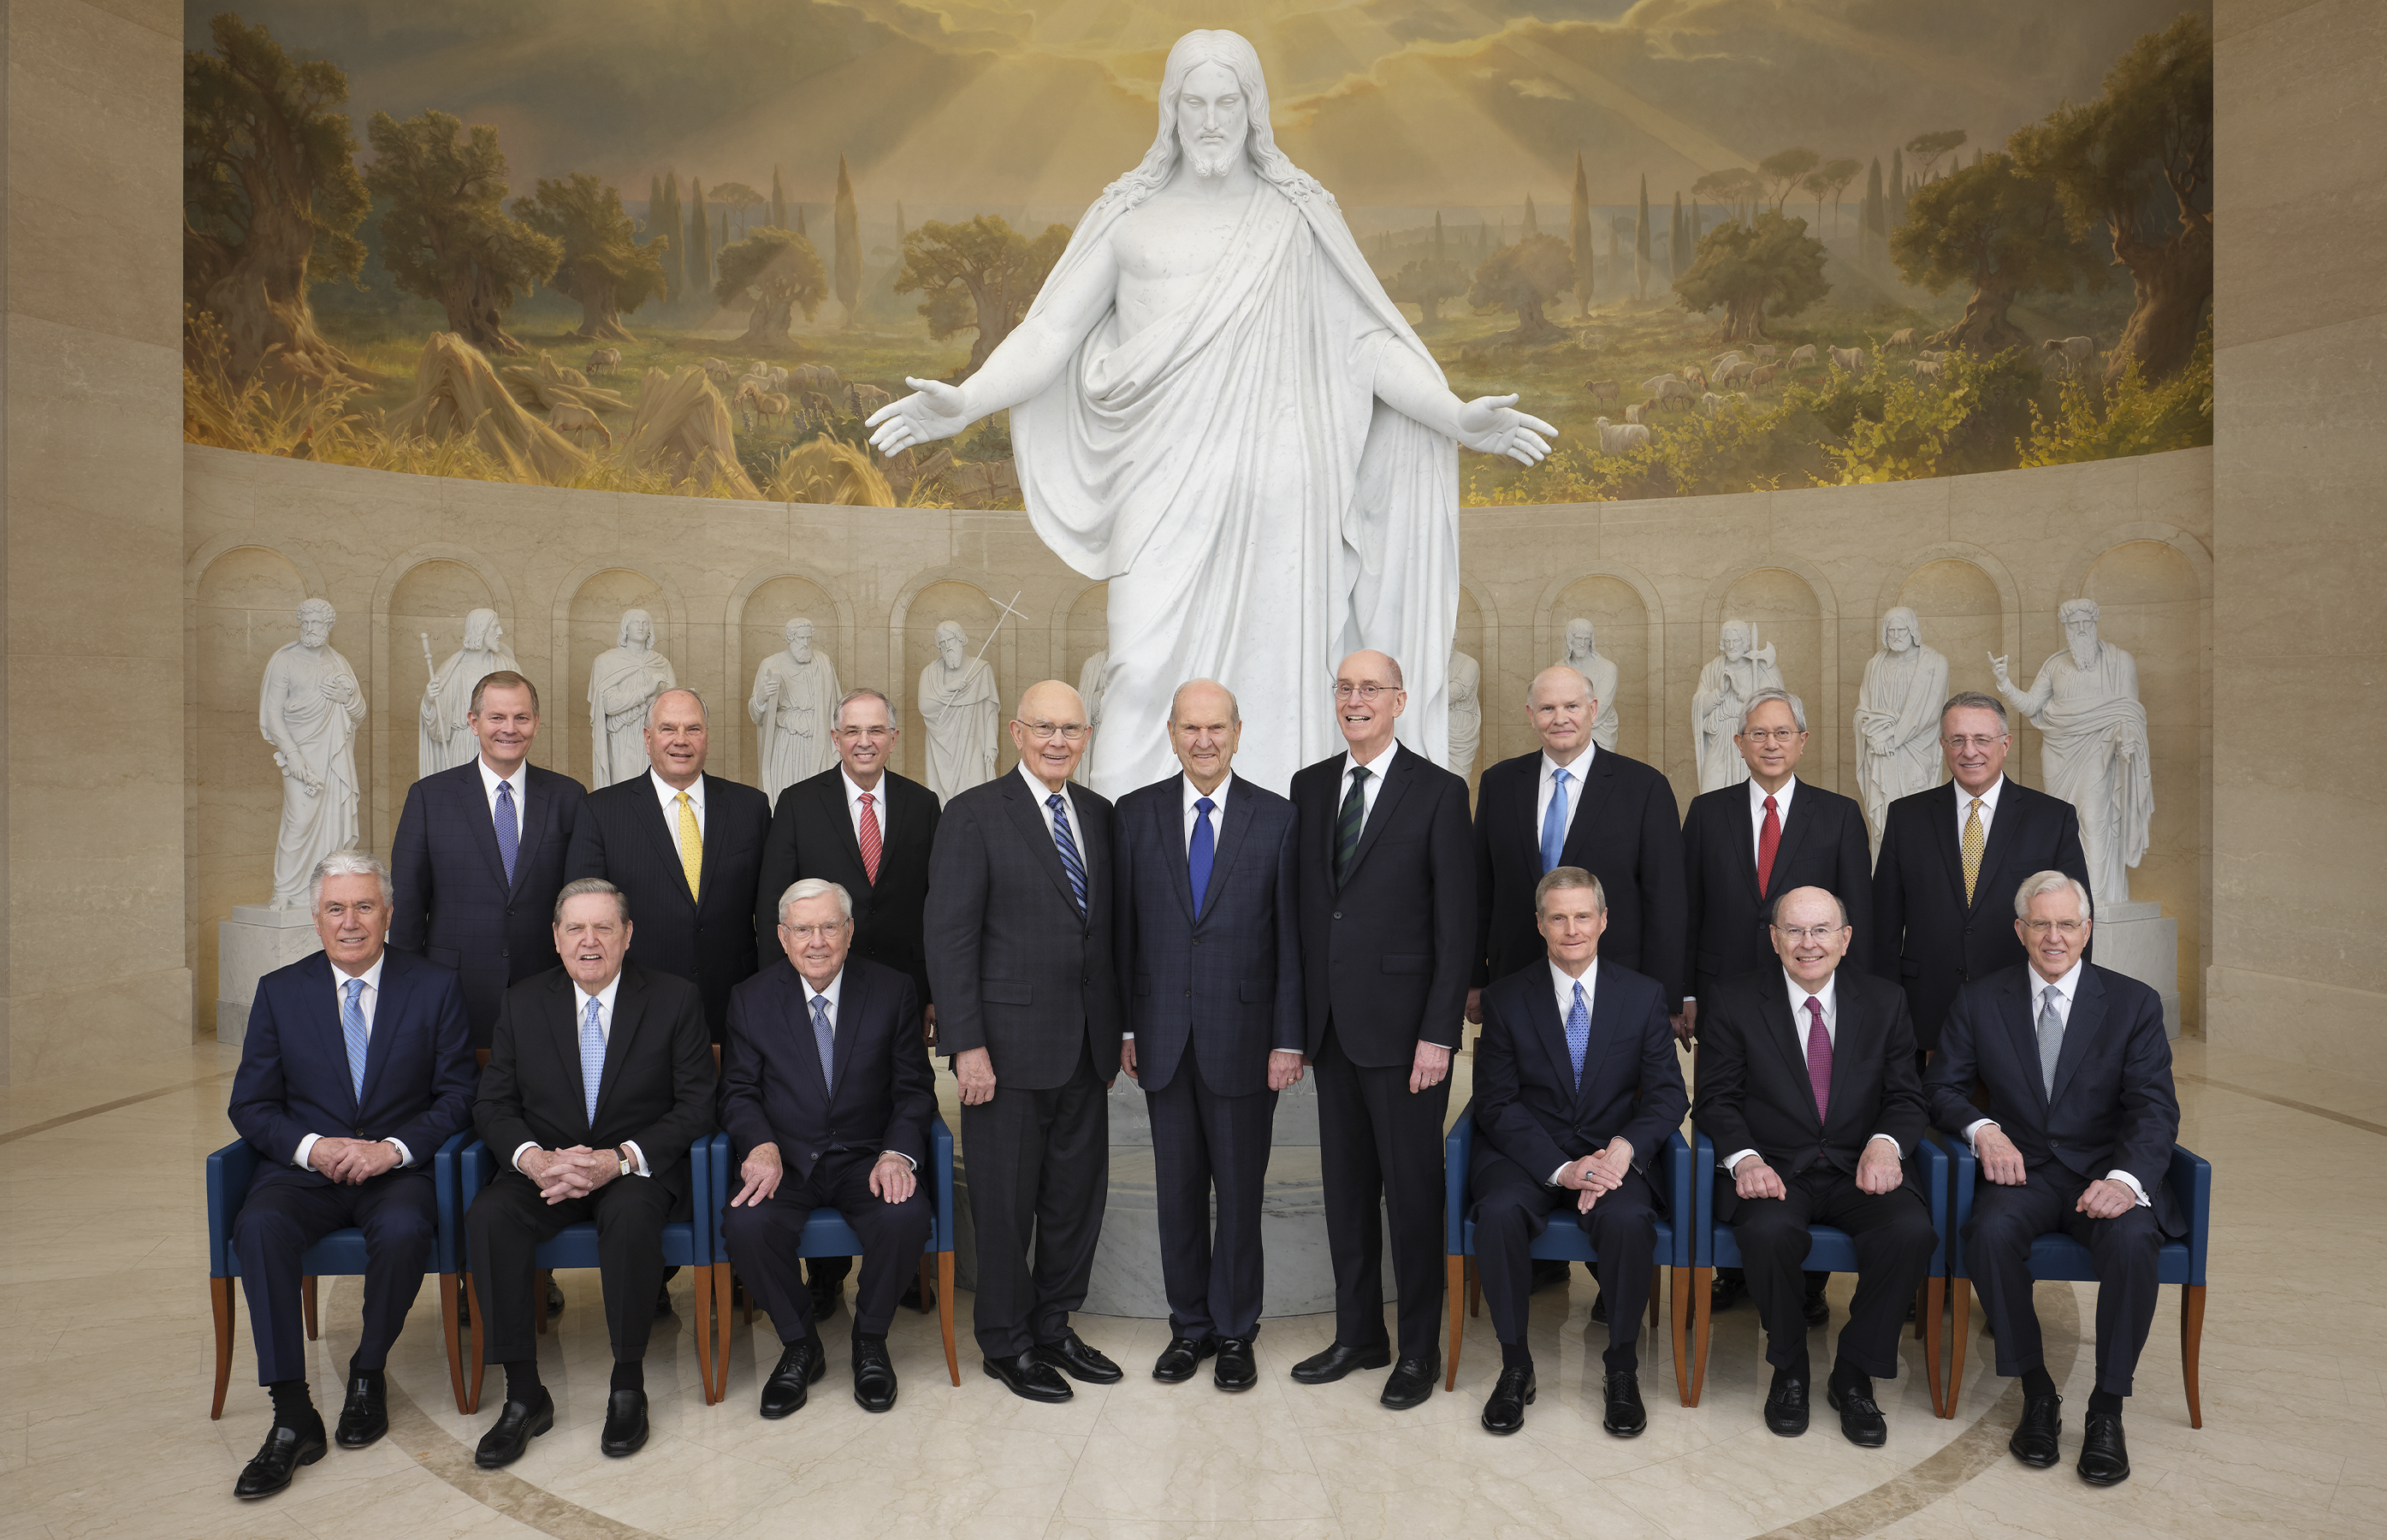 All the members of the First Presidency and the Quorum of the Twelve Apostles are seated or standing with the Christus Statue and statues of the Original Twelve at the Visitors' Center in Rome, Italy.  Front Left to Right: Dieter F. Uchtdorf, Jeffrey R. Holland, M. Russell Ballard, Dallin H. Oaks, Russell M. Nelson, Henry B. Eyring, David A. Bednar, Quentin L. Cook, D. Todd Christofferson, Gary E. Stevenson, Ronald A. Rasband, Neil L. Andersen, Dale G. Renlund, Gerrit W. Gong, Ulisses Soares